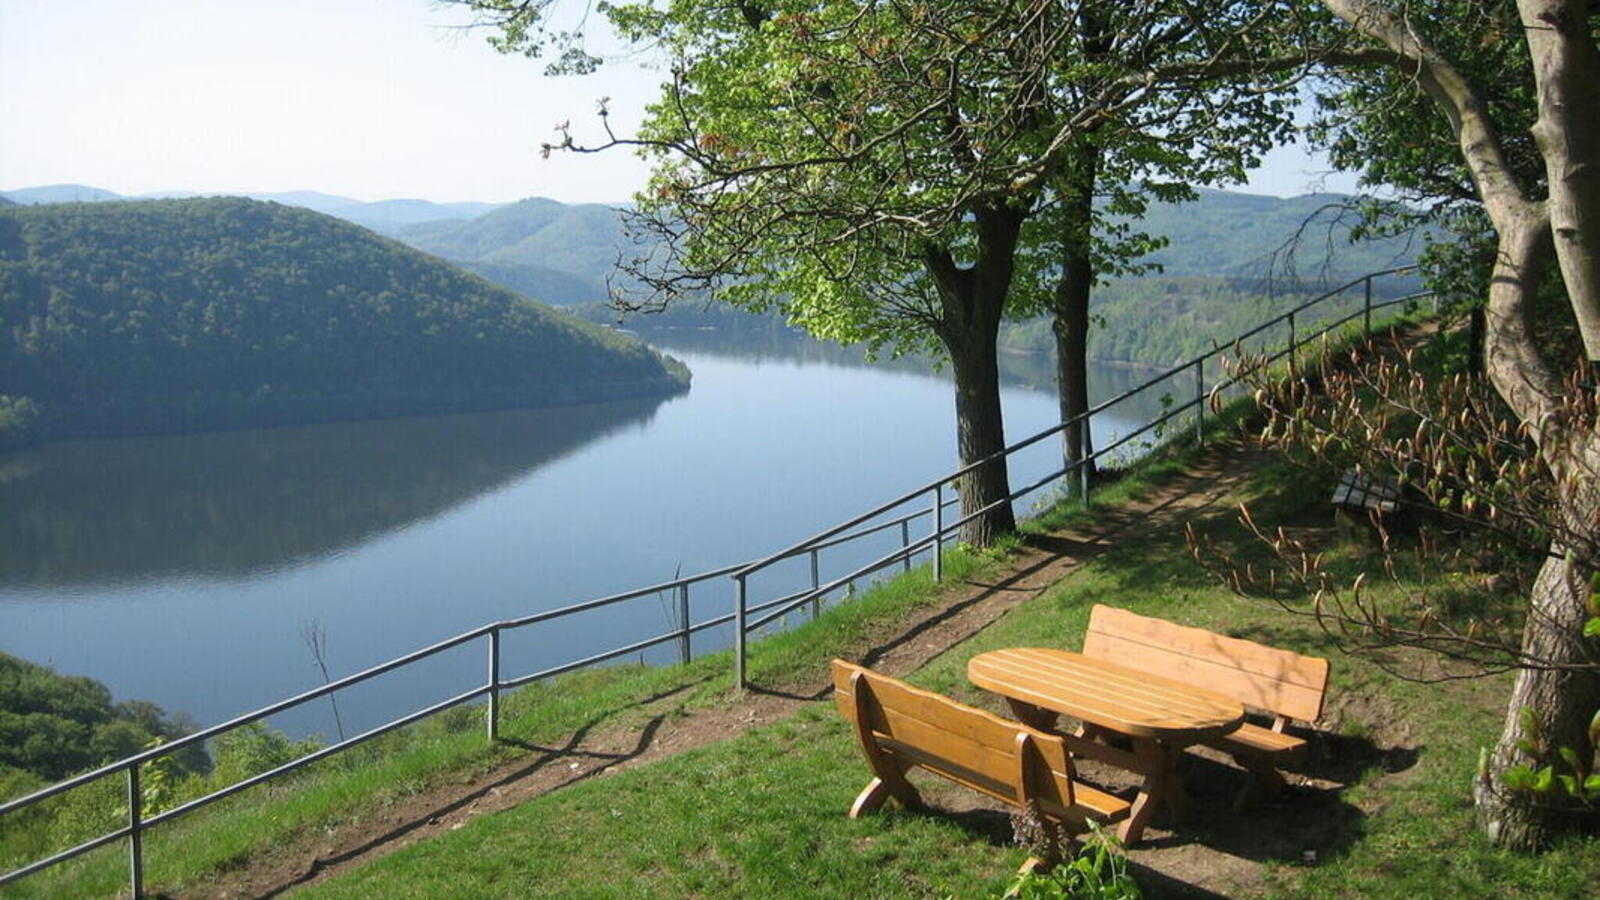 Edersee lake close to the Ringhotel Roggenland, 4 stars hotel in the Hessisches Bergland/Vogelsberg